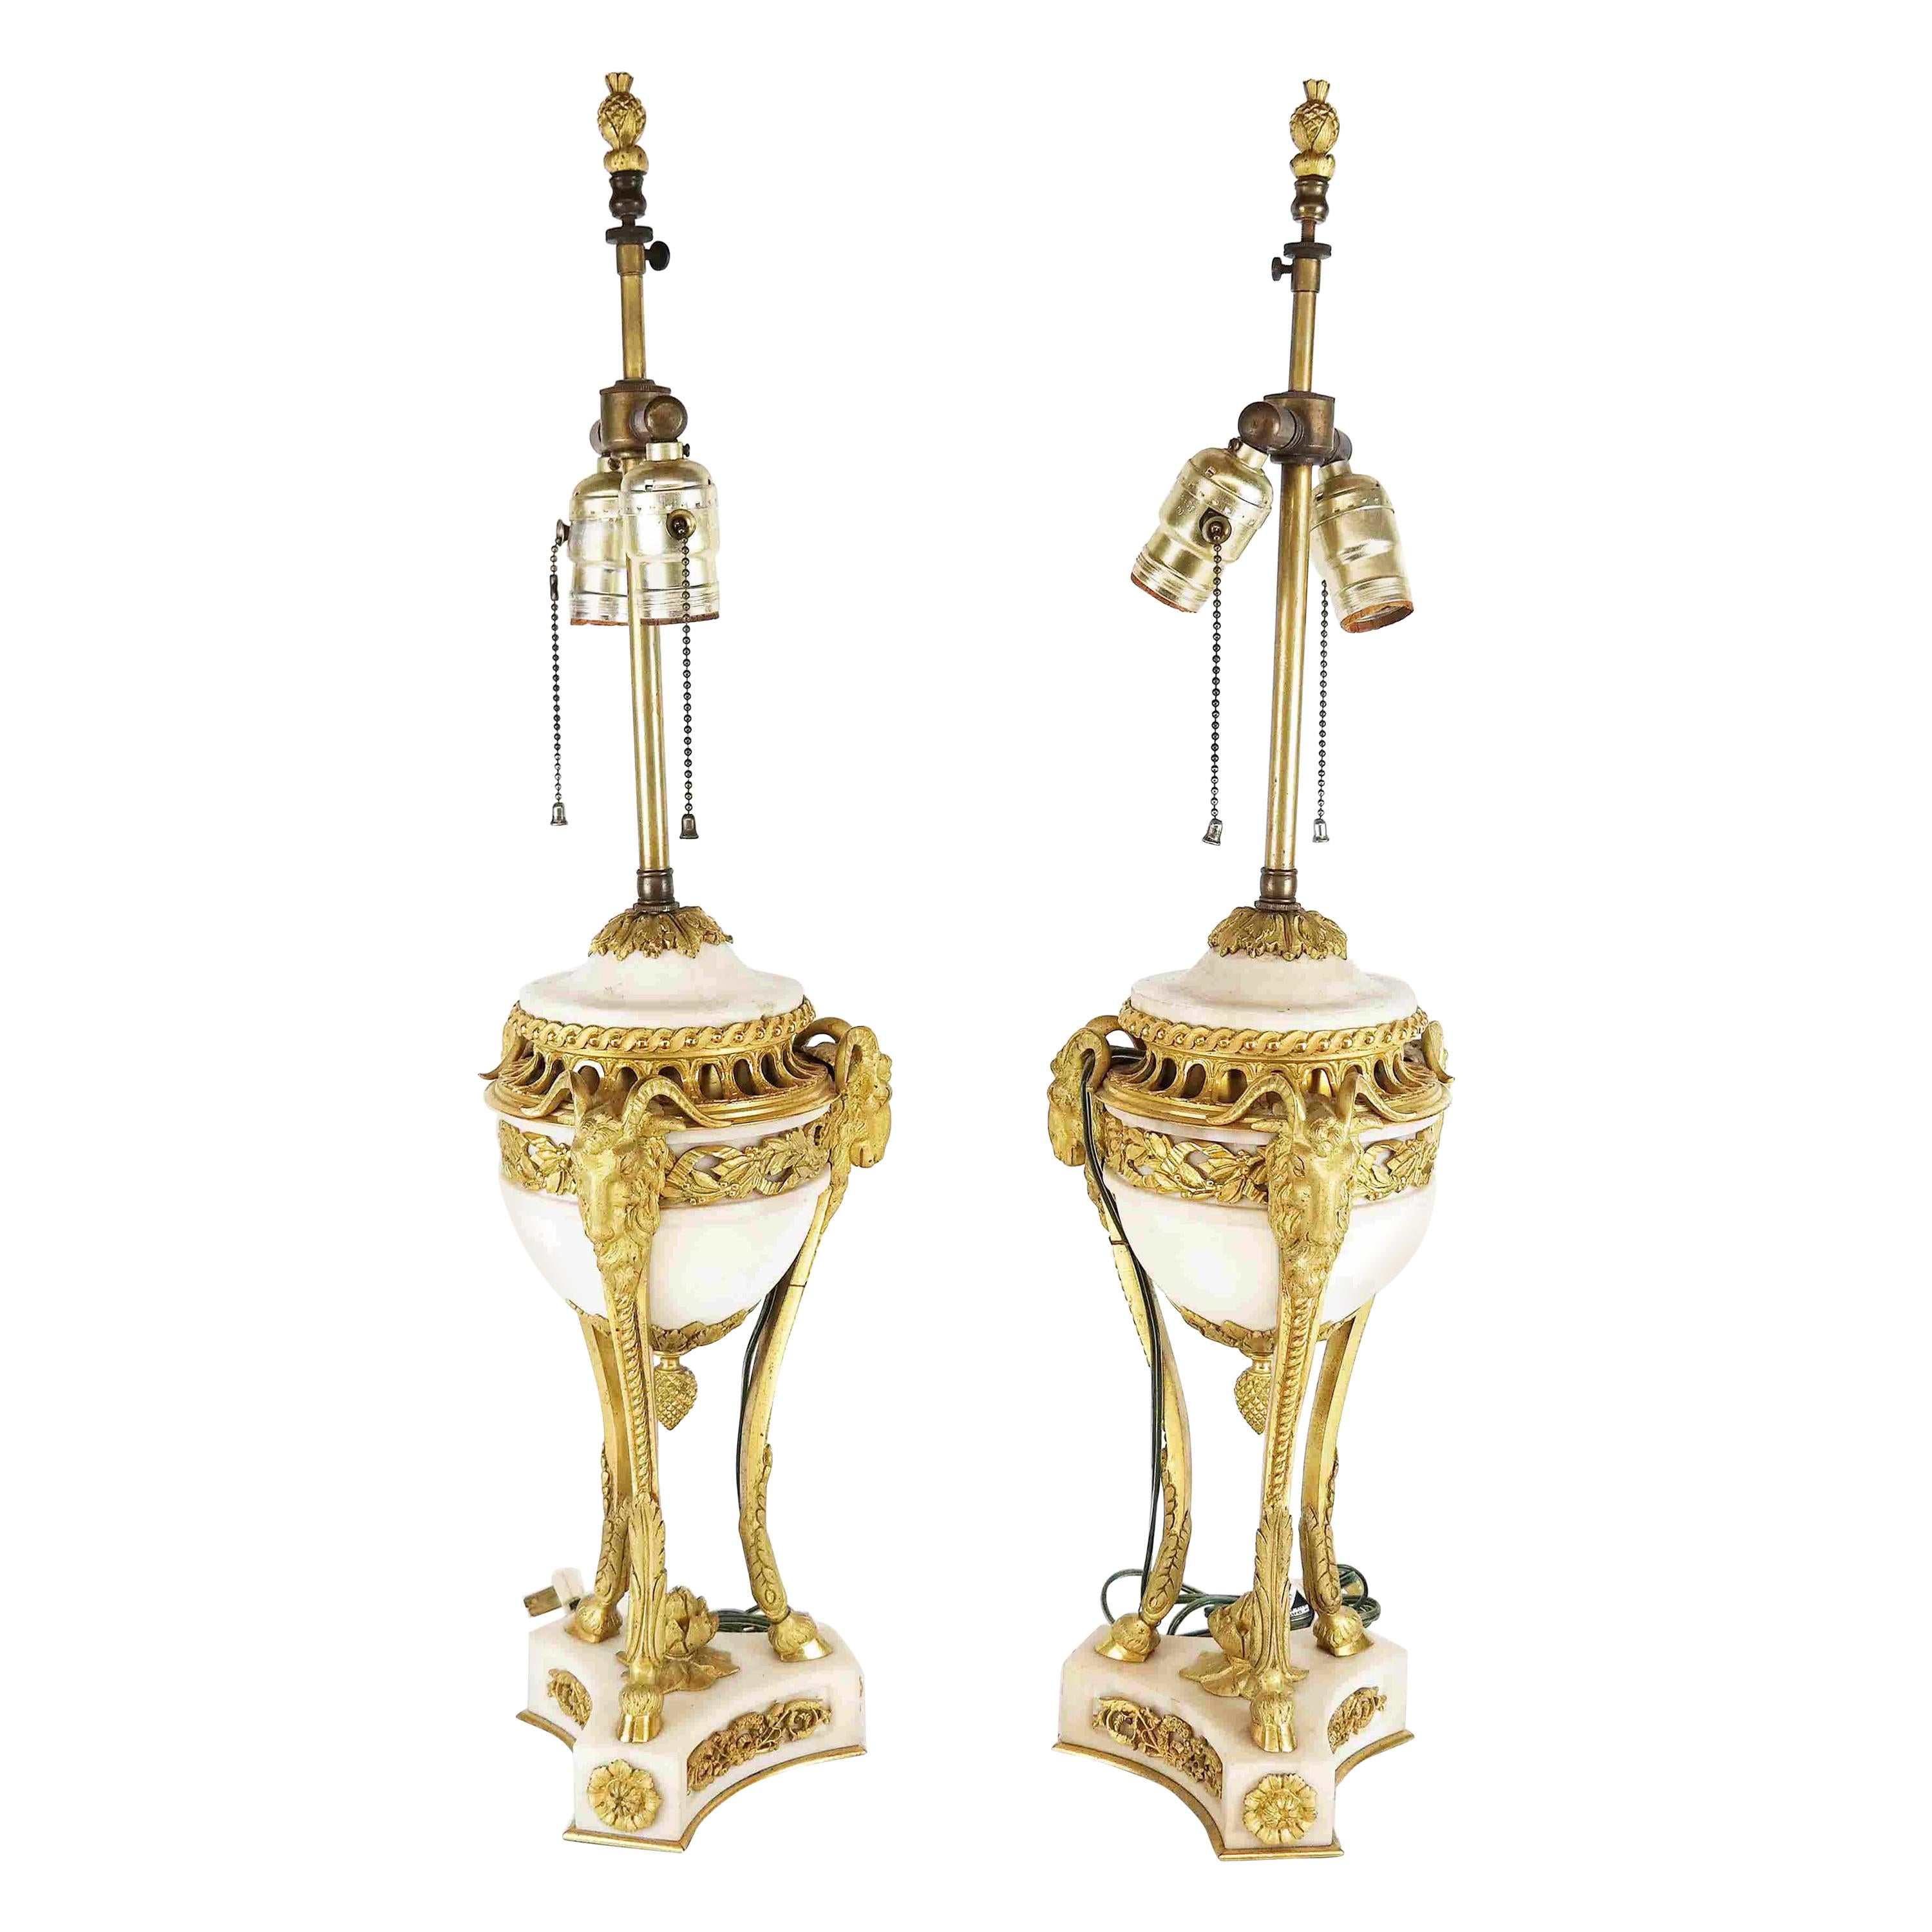 Fine Pair of 19th C French Louis XVI Carrera Marble and Gilt Bronze Lamps